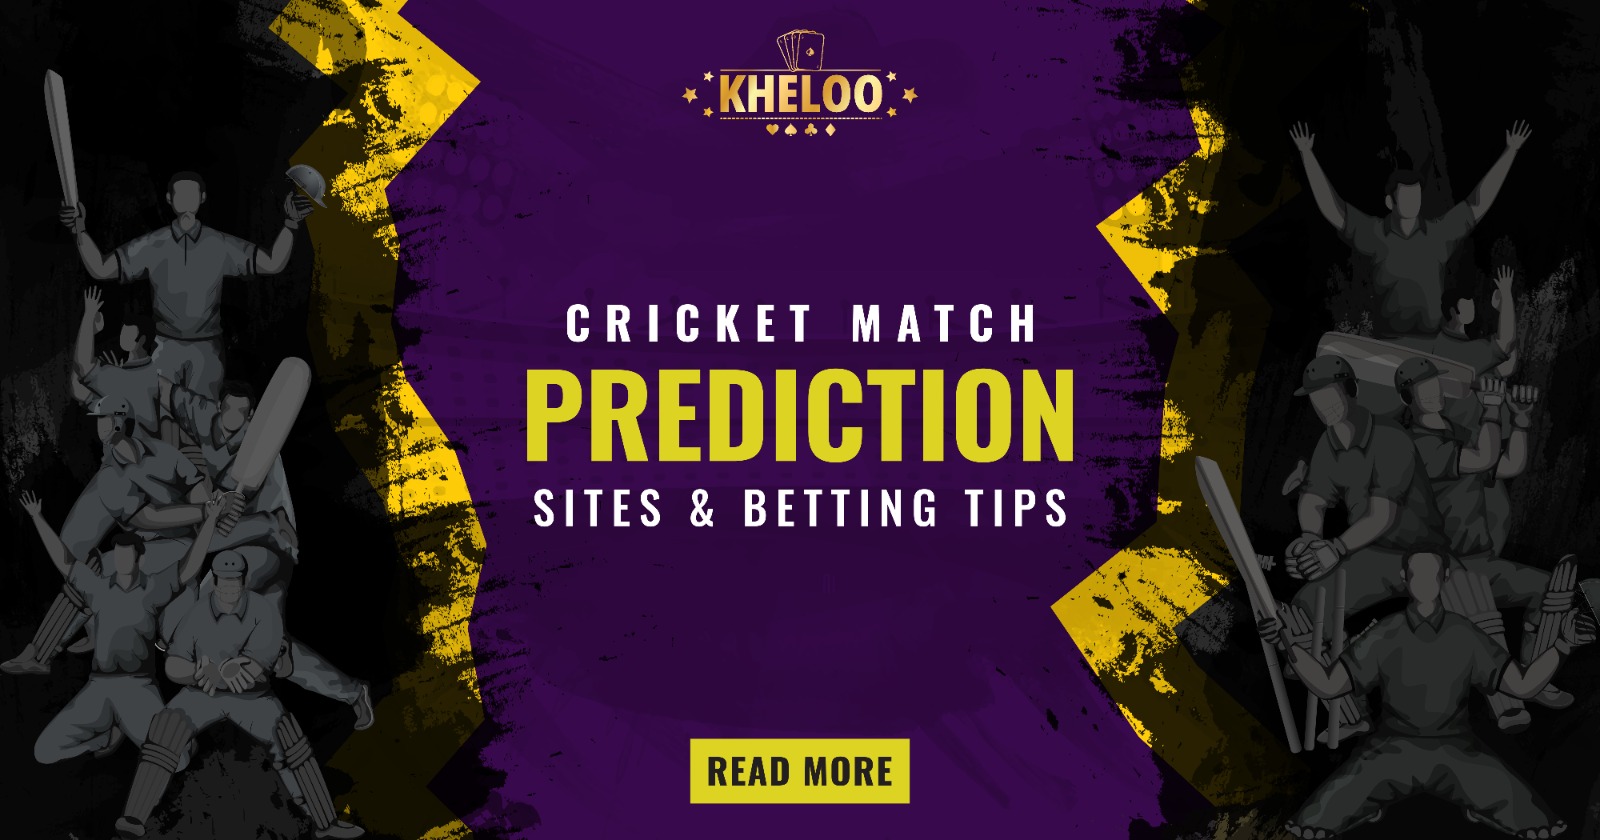 Cricket Match Prediction Sites & Betting Tips - Kheloo